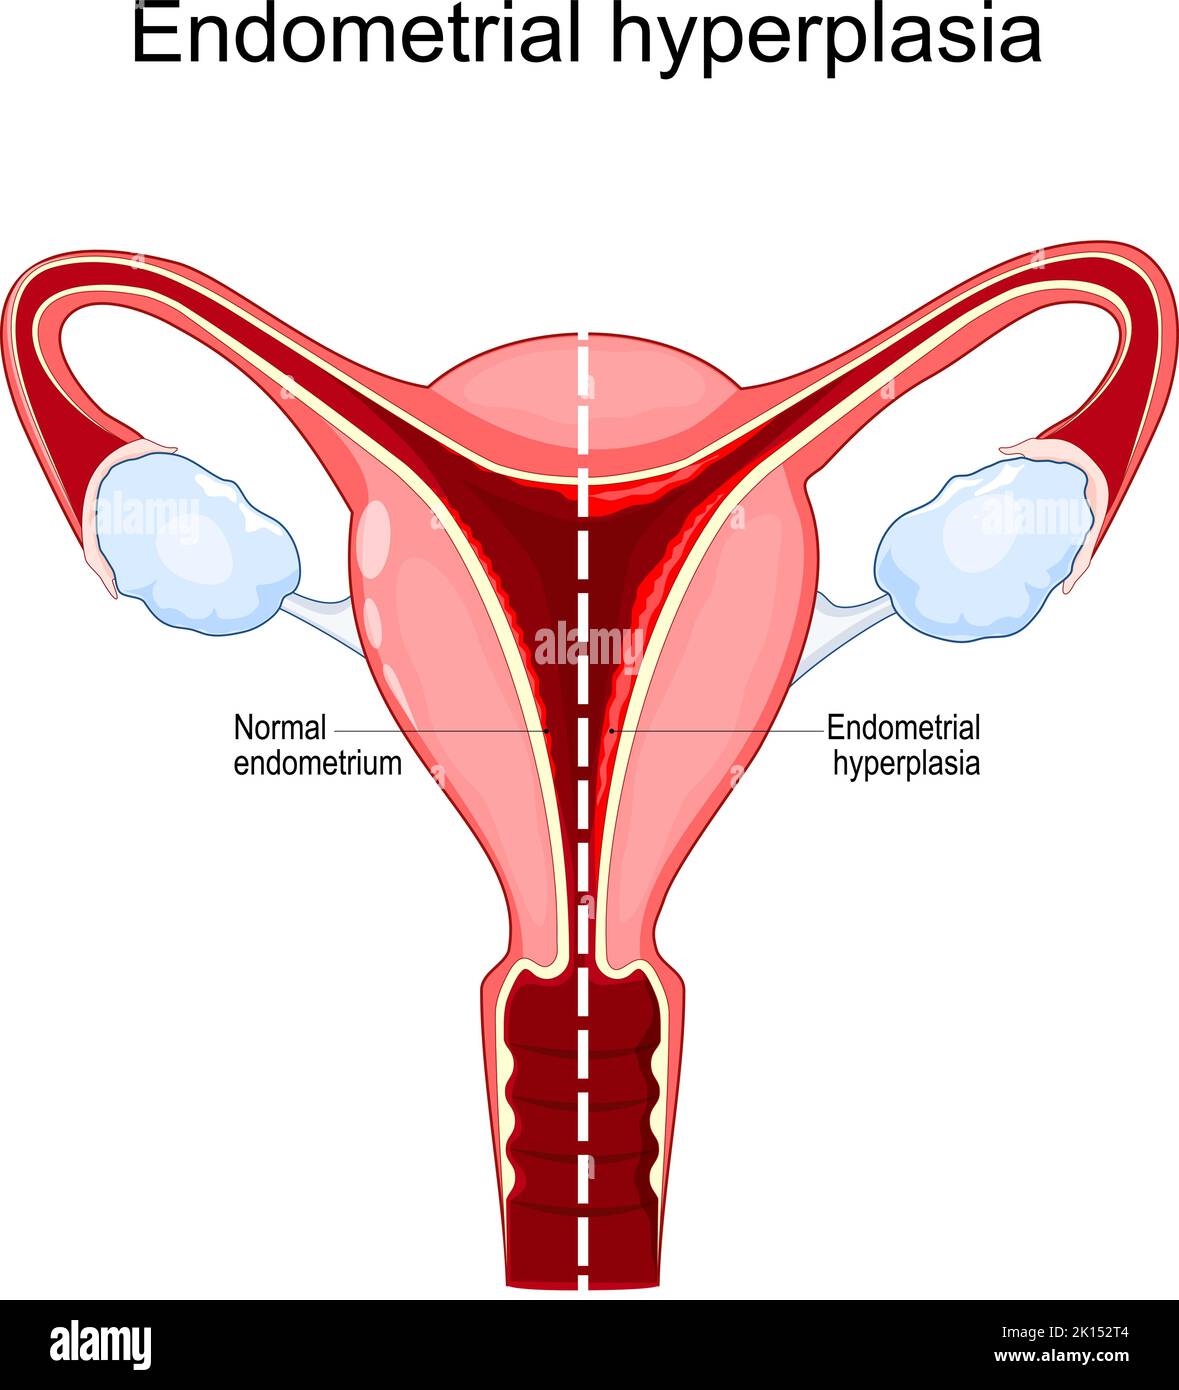 Endometrial hyperplasia. comparison uterus with normal endometrium and excessive proliferation of the cells of the inner lining of the uterus. Female Stock Vector